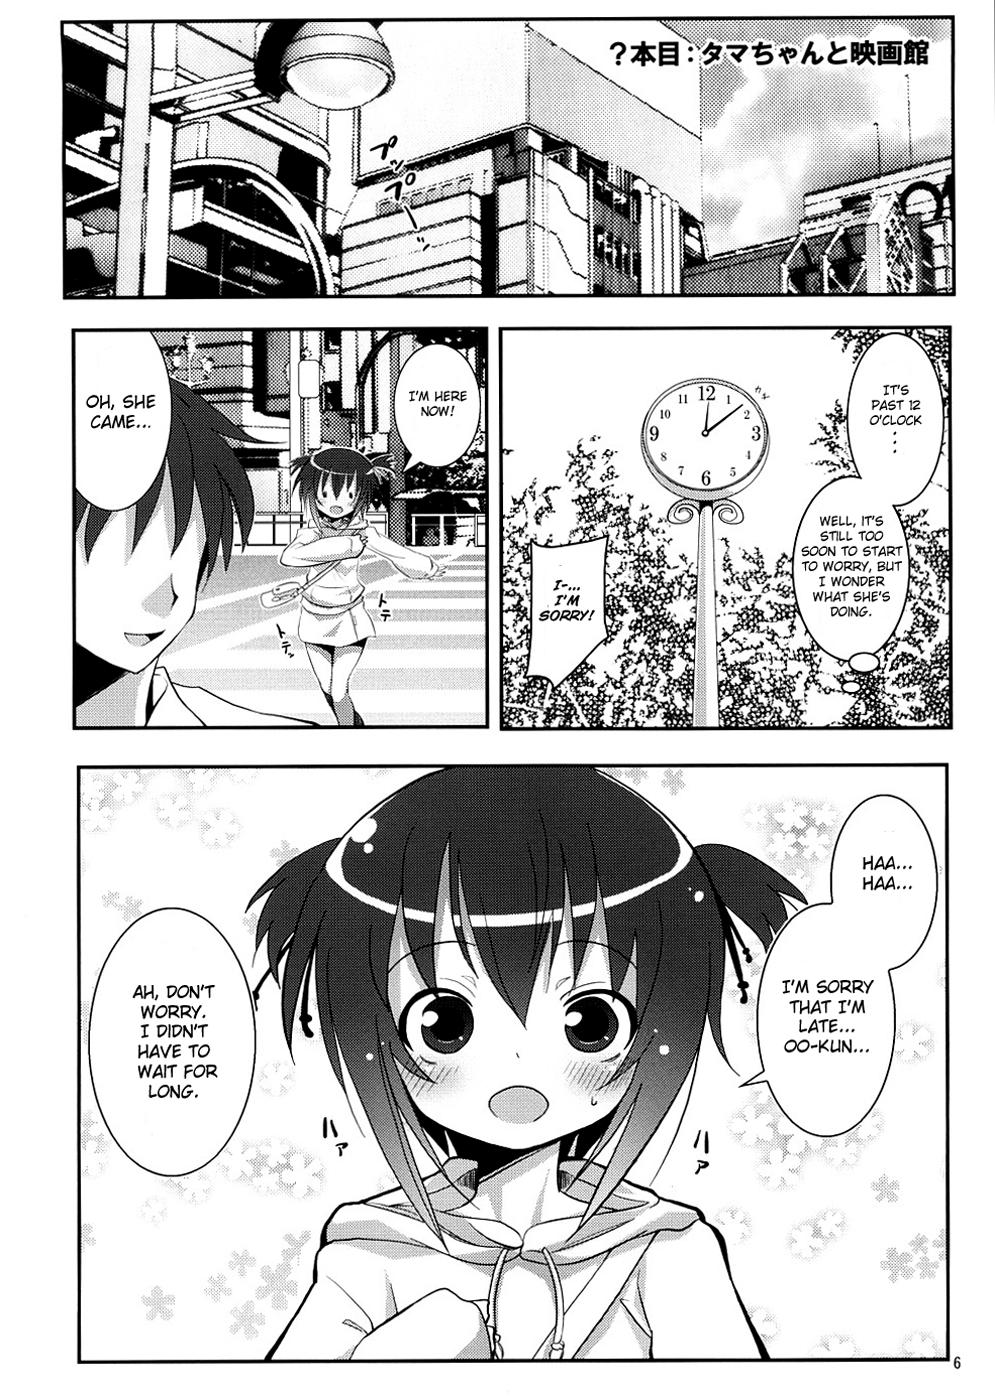 Best Tama-chan to Date. - Bamboo blade Tugging - Page 5